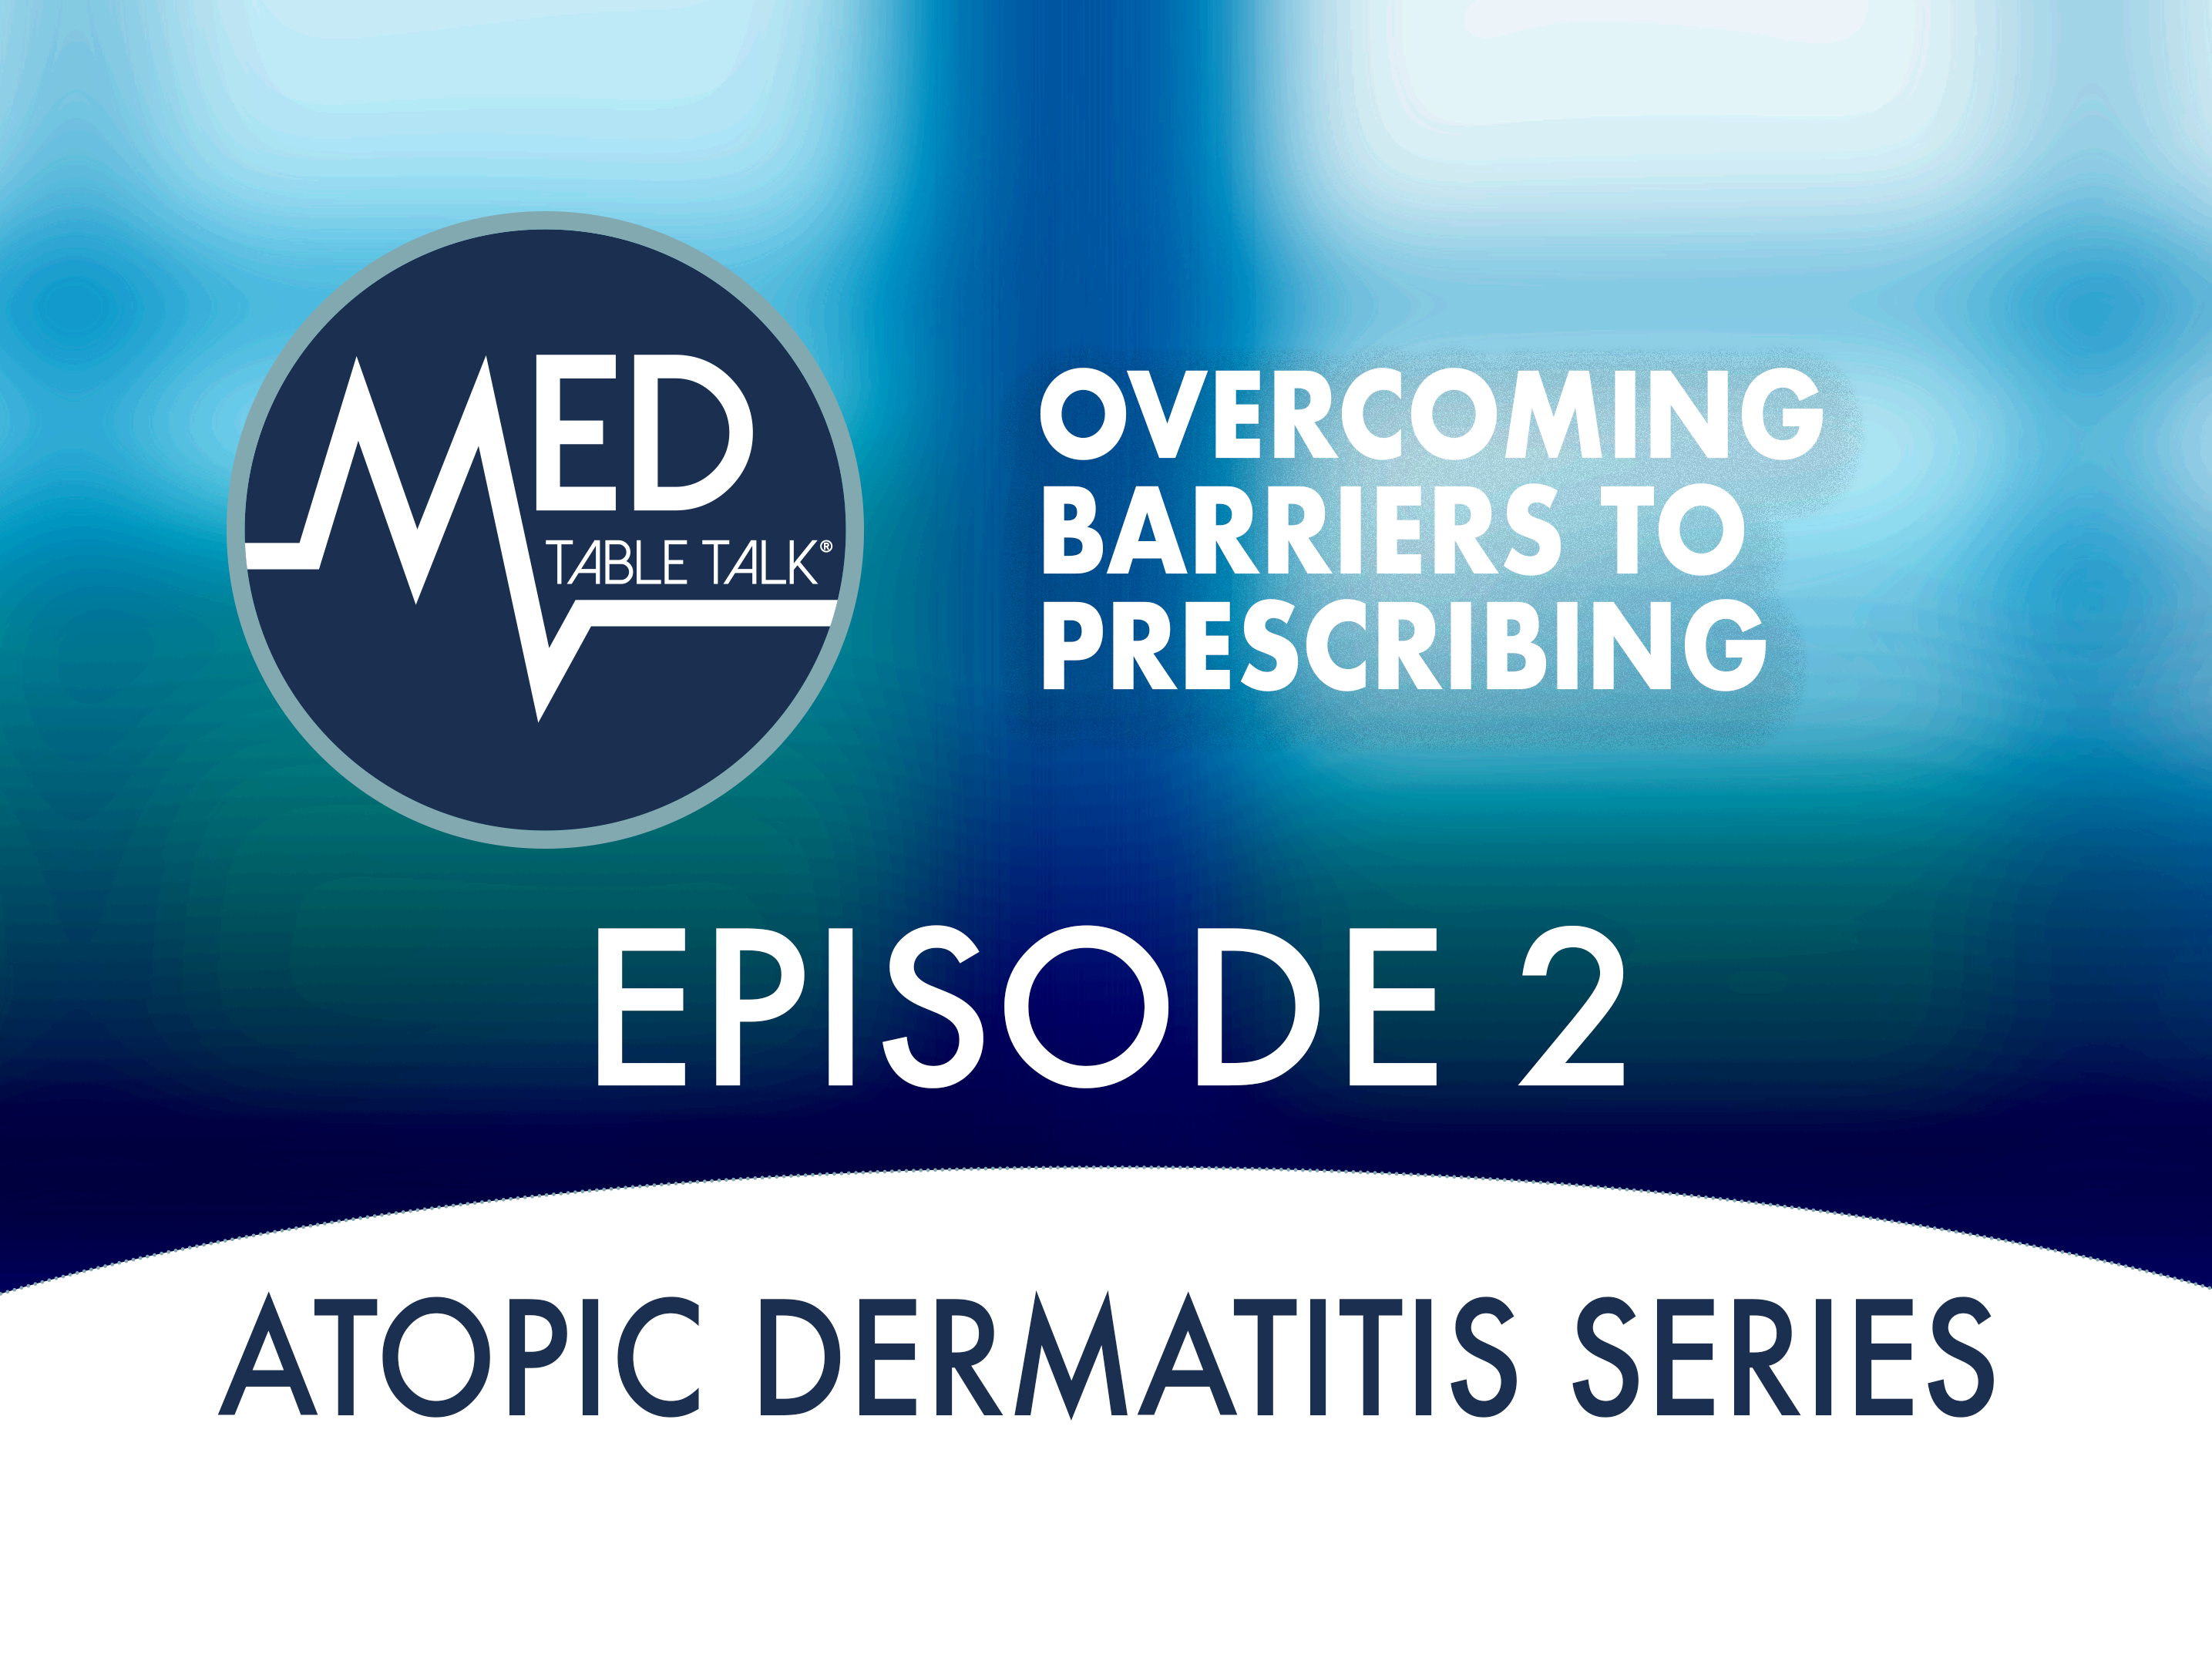 Episode 2 -  Overcoming Barriers to Prescribing: A Med Table Talk™: Targeted Therapy in Atopic Dermatitis Series